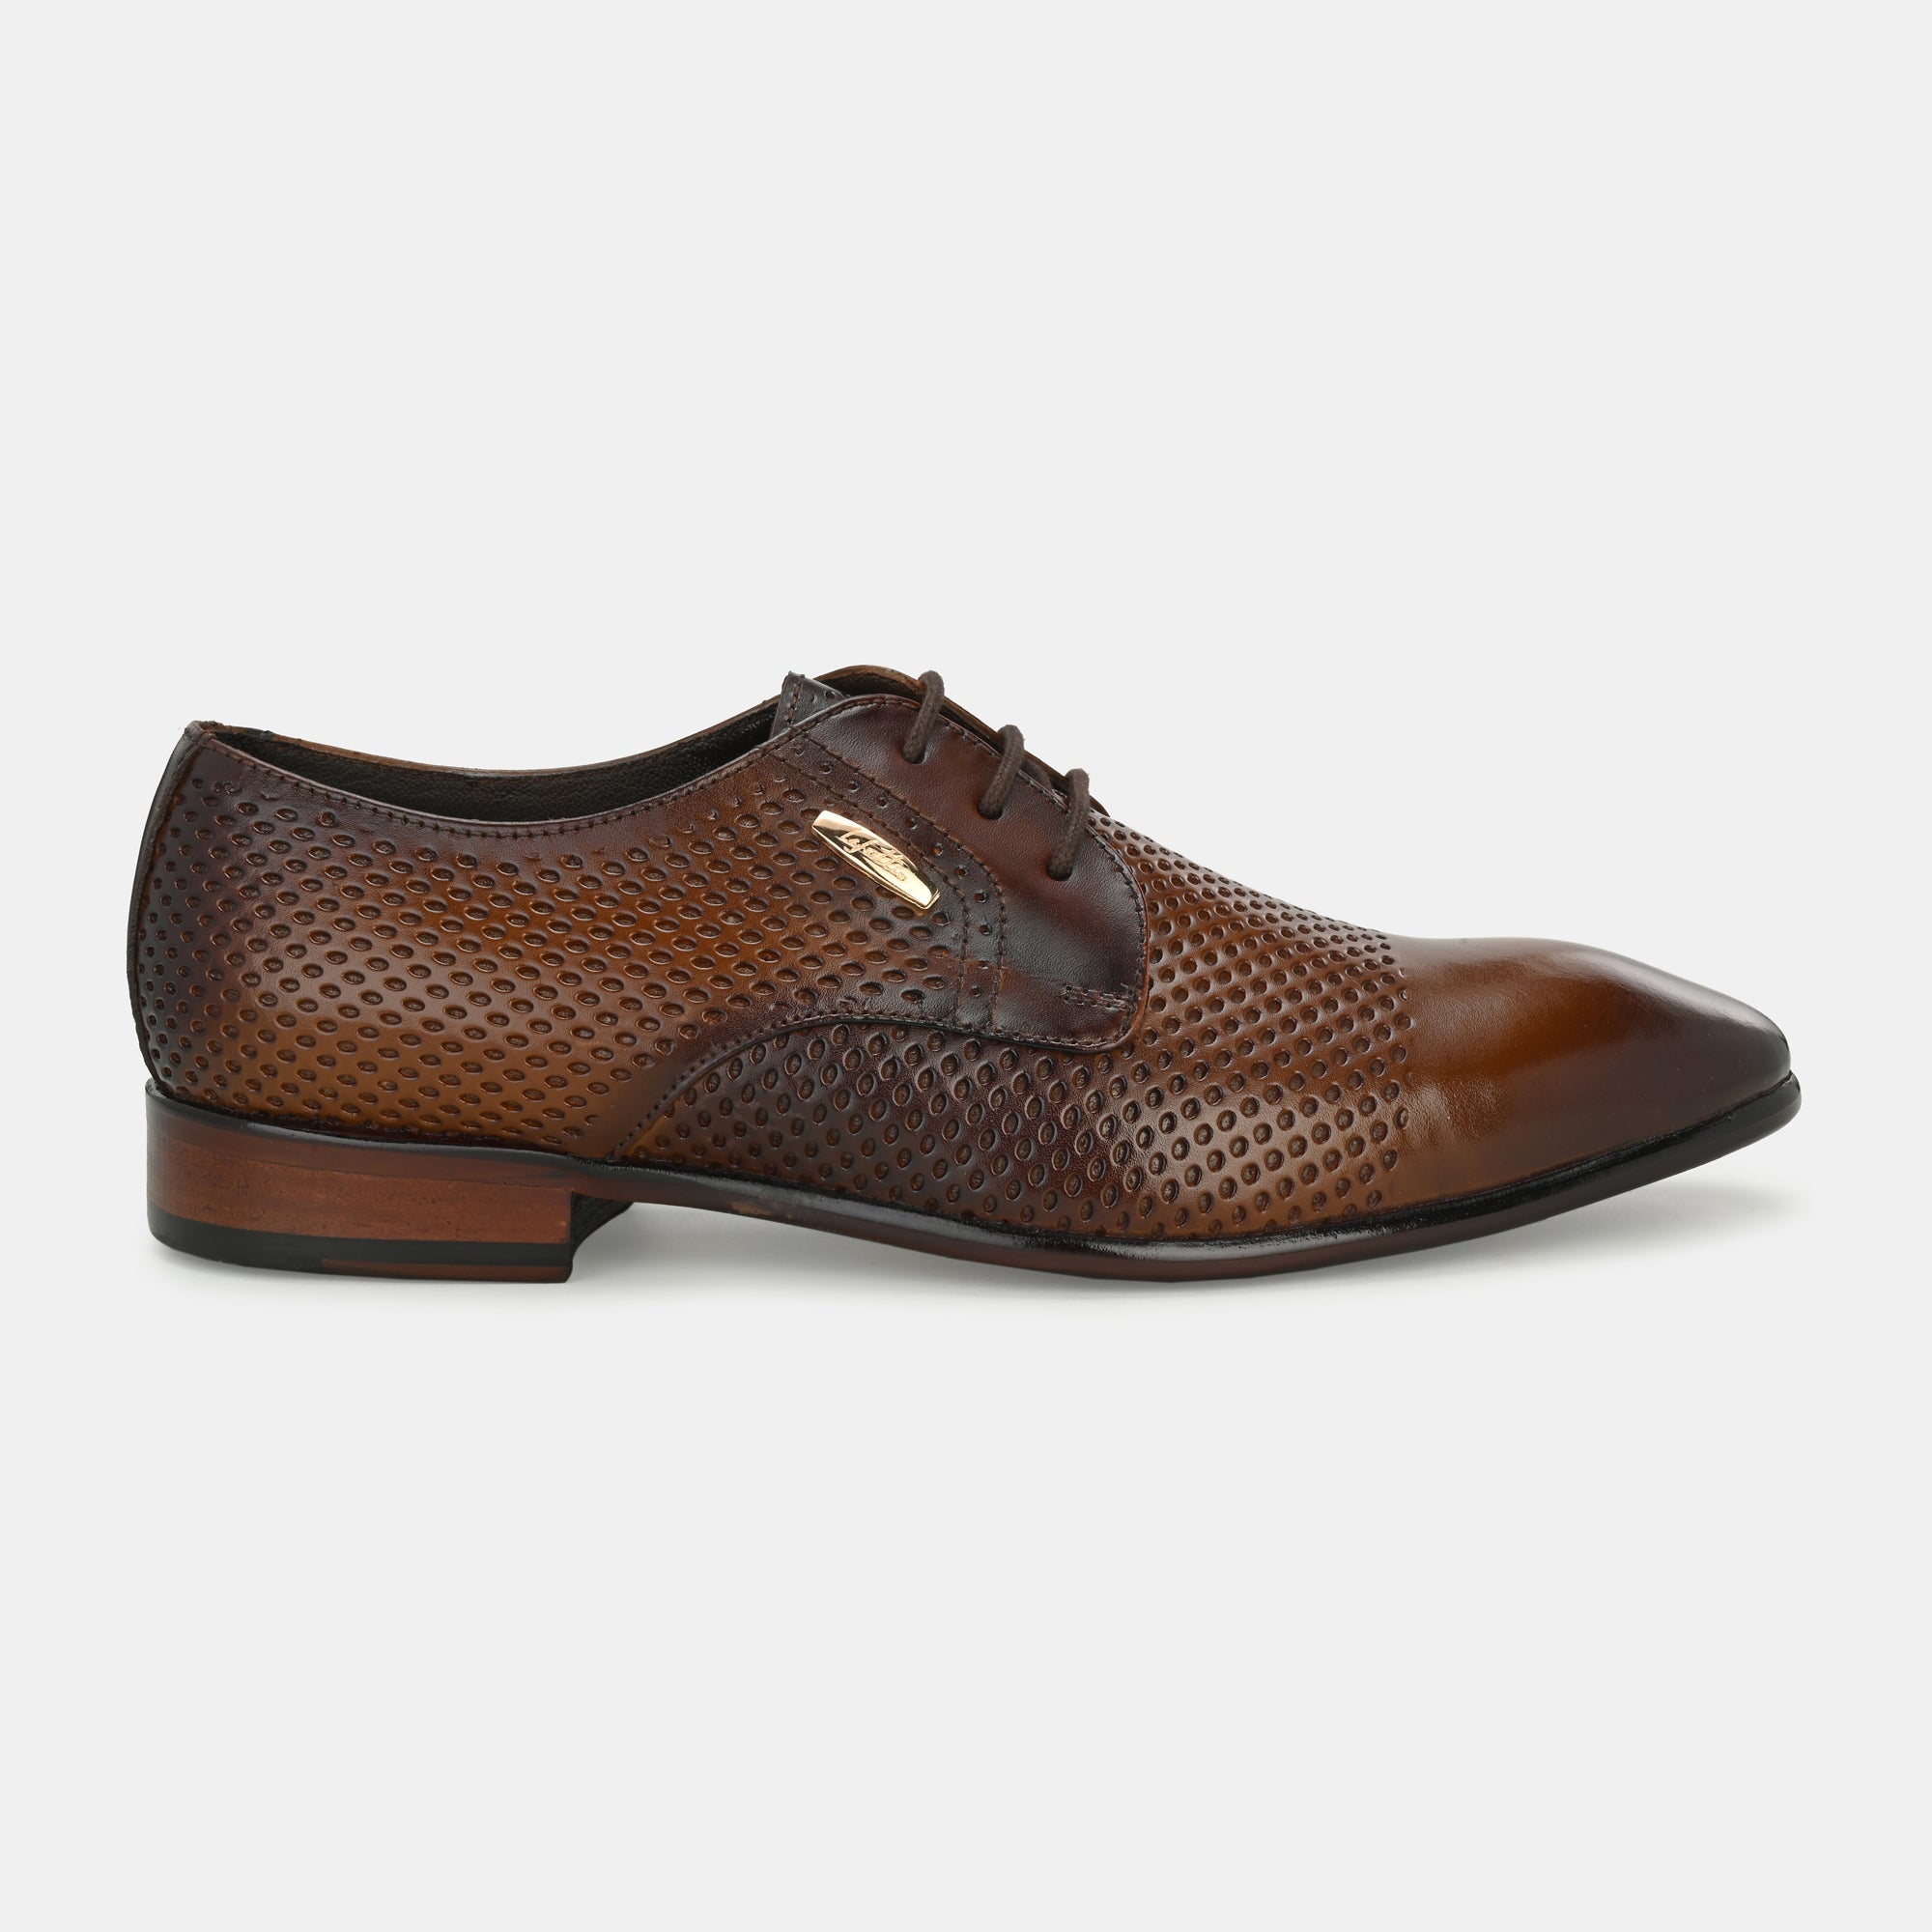 Tan Perforated Lace-Up Shoes by Lafattio